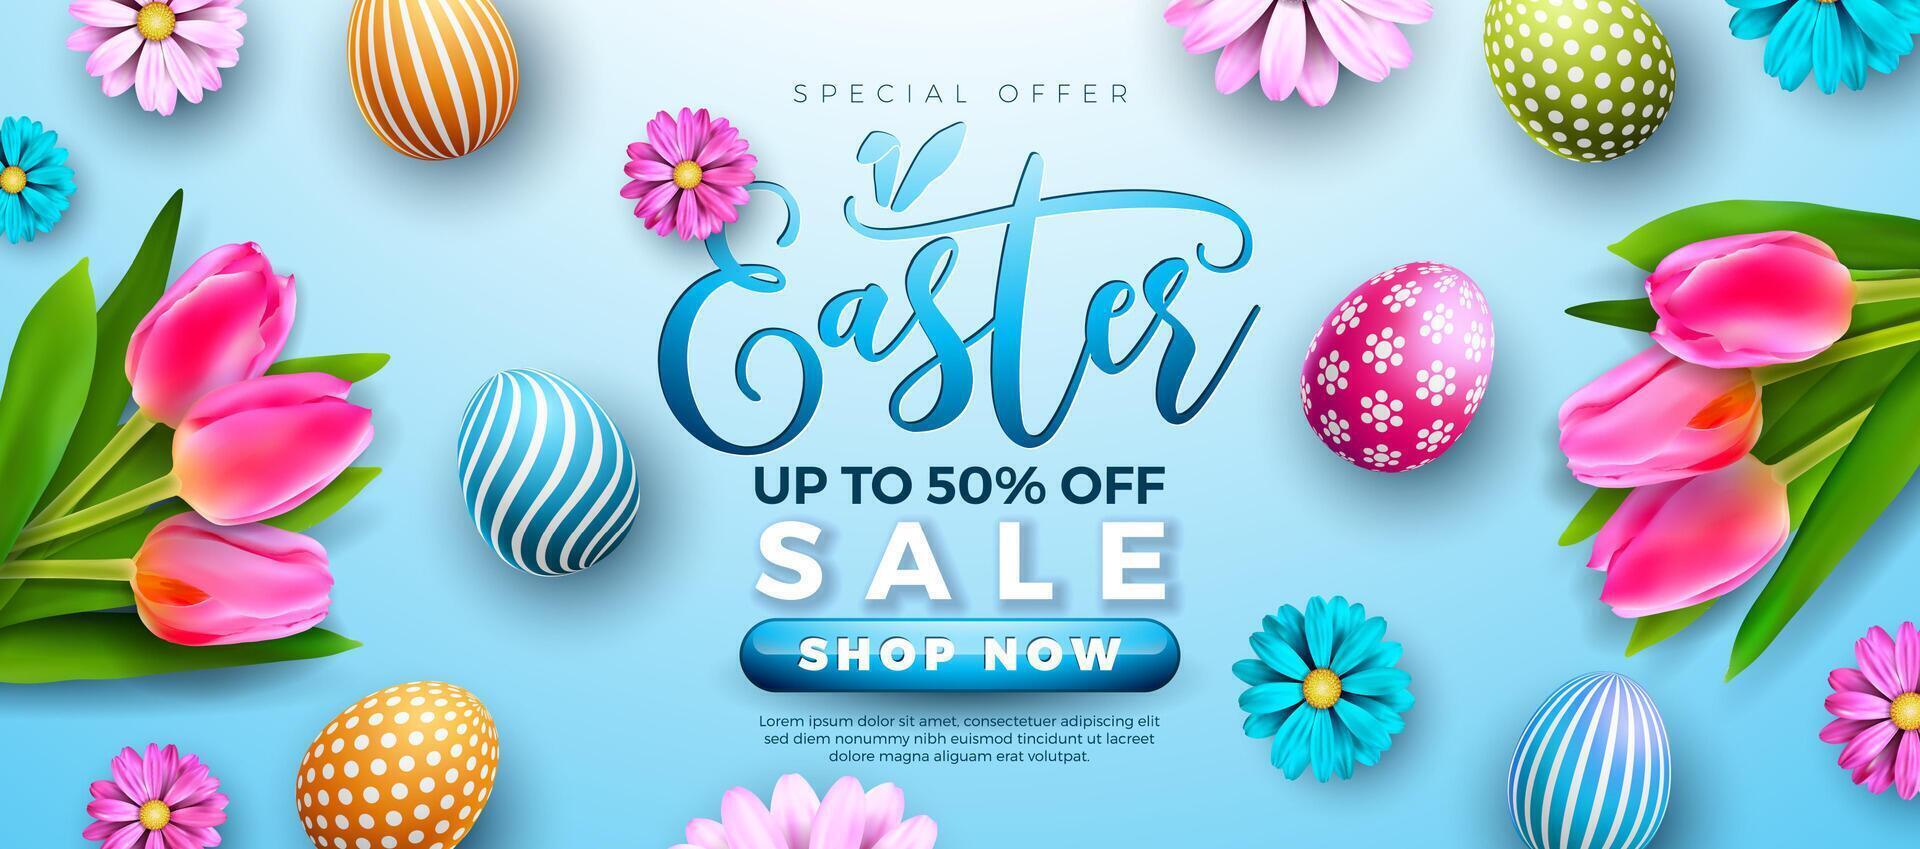 Easter Sale Illustration with Colorful Painted Egg, Spring Flower and Tulip on Light Blue Background. Vector Easter Holiday Design Template for Coupon, Web Banner, Voucher or Promotional Poster.